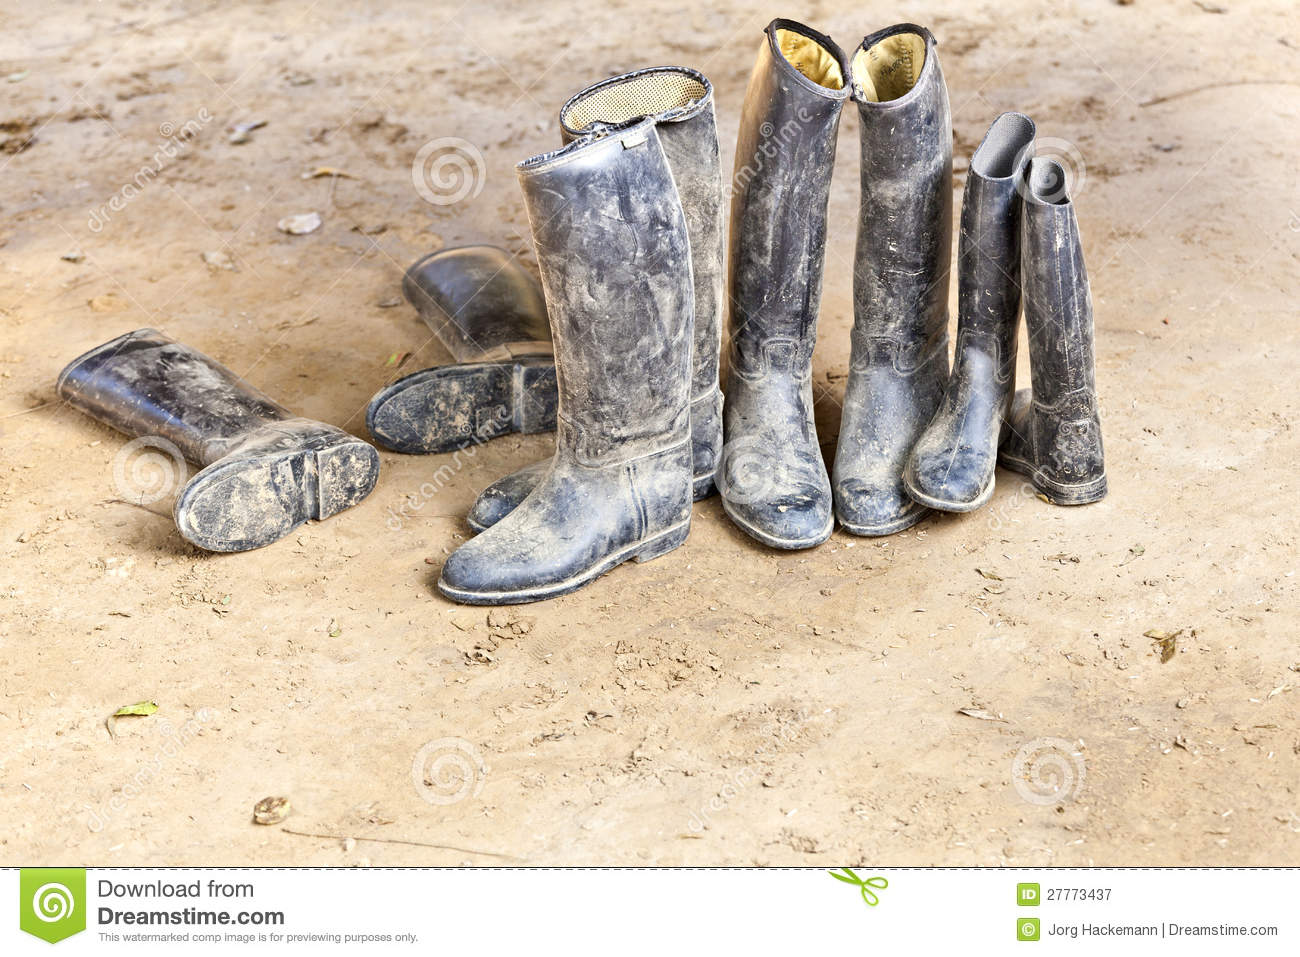     Free Stock Photography  Dirty Riding Boots Standing At Muddy Ground